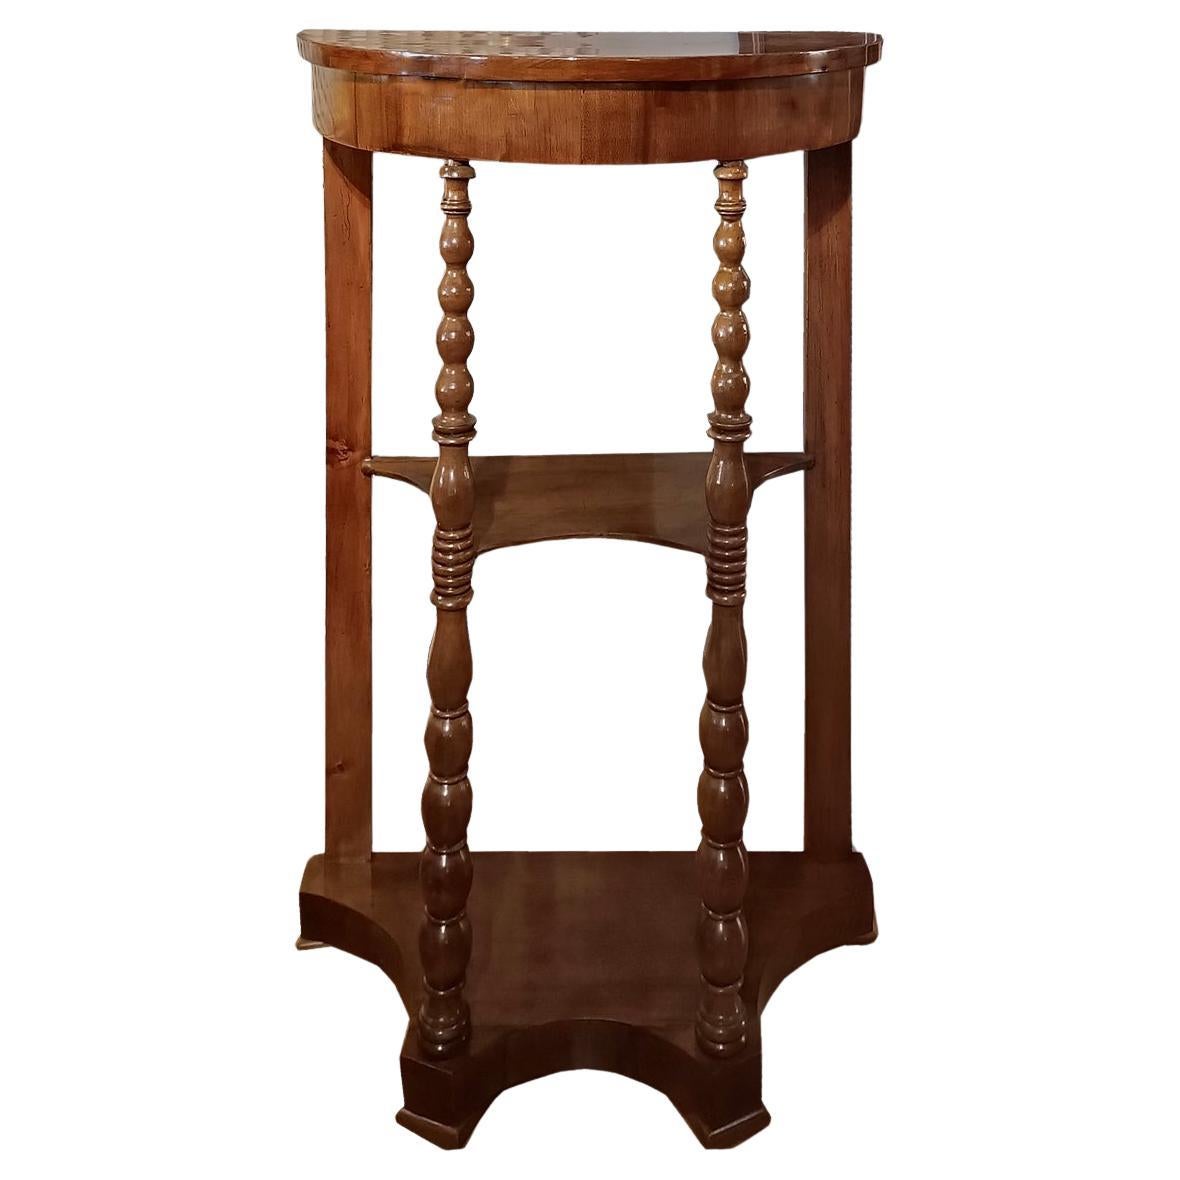 FIRST HALF OF THE 19th CENTURY WALNUT ÉTAGÈRE  For Sale